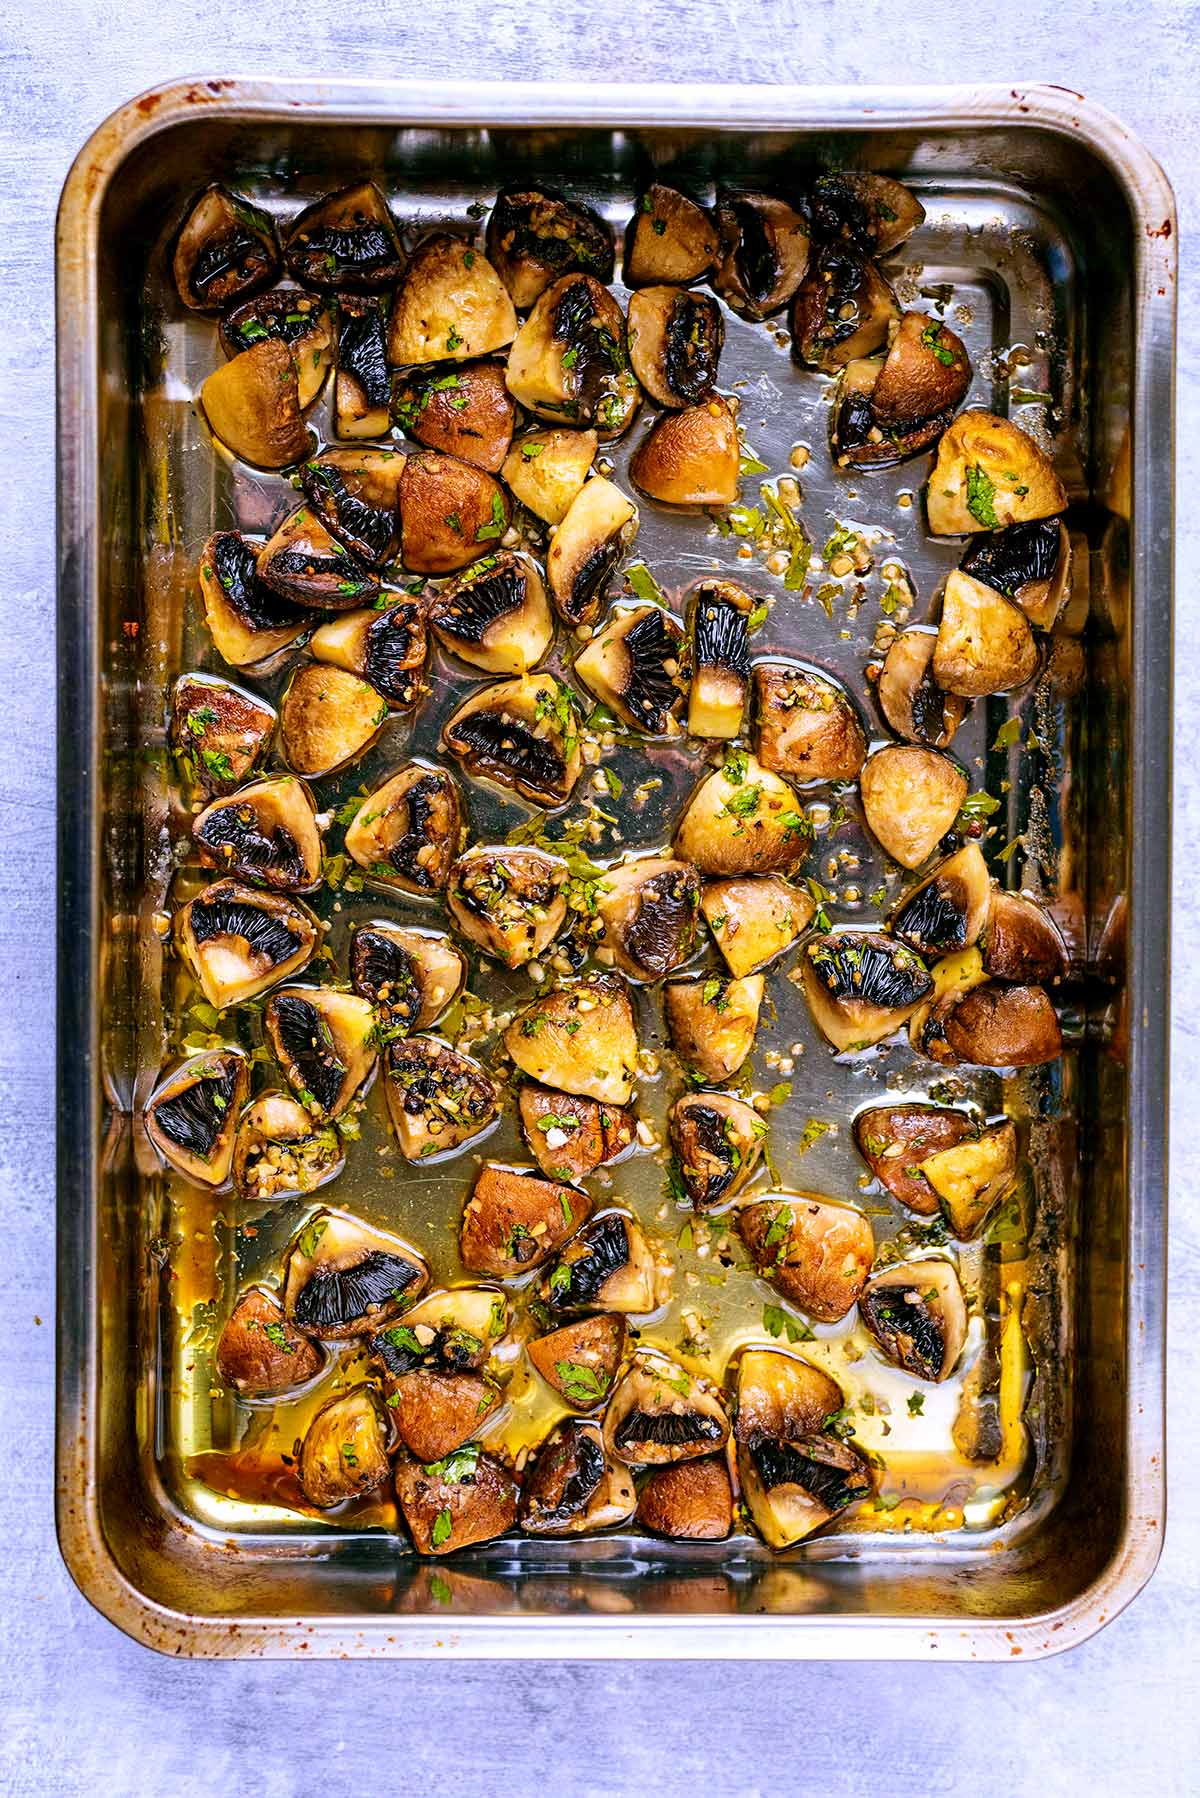 Chopped roasted mushrooms in a baking tray.